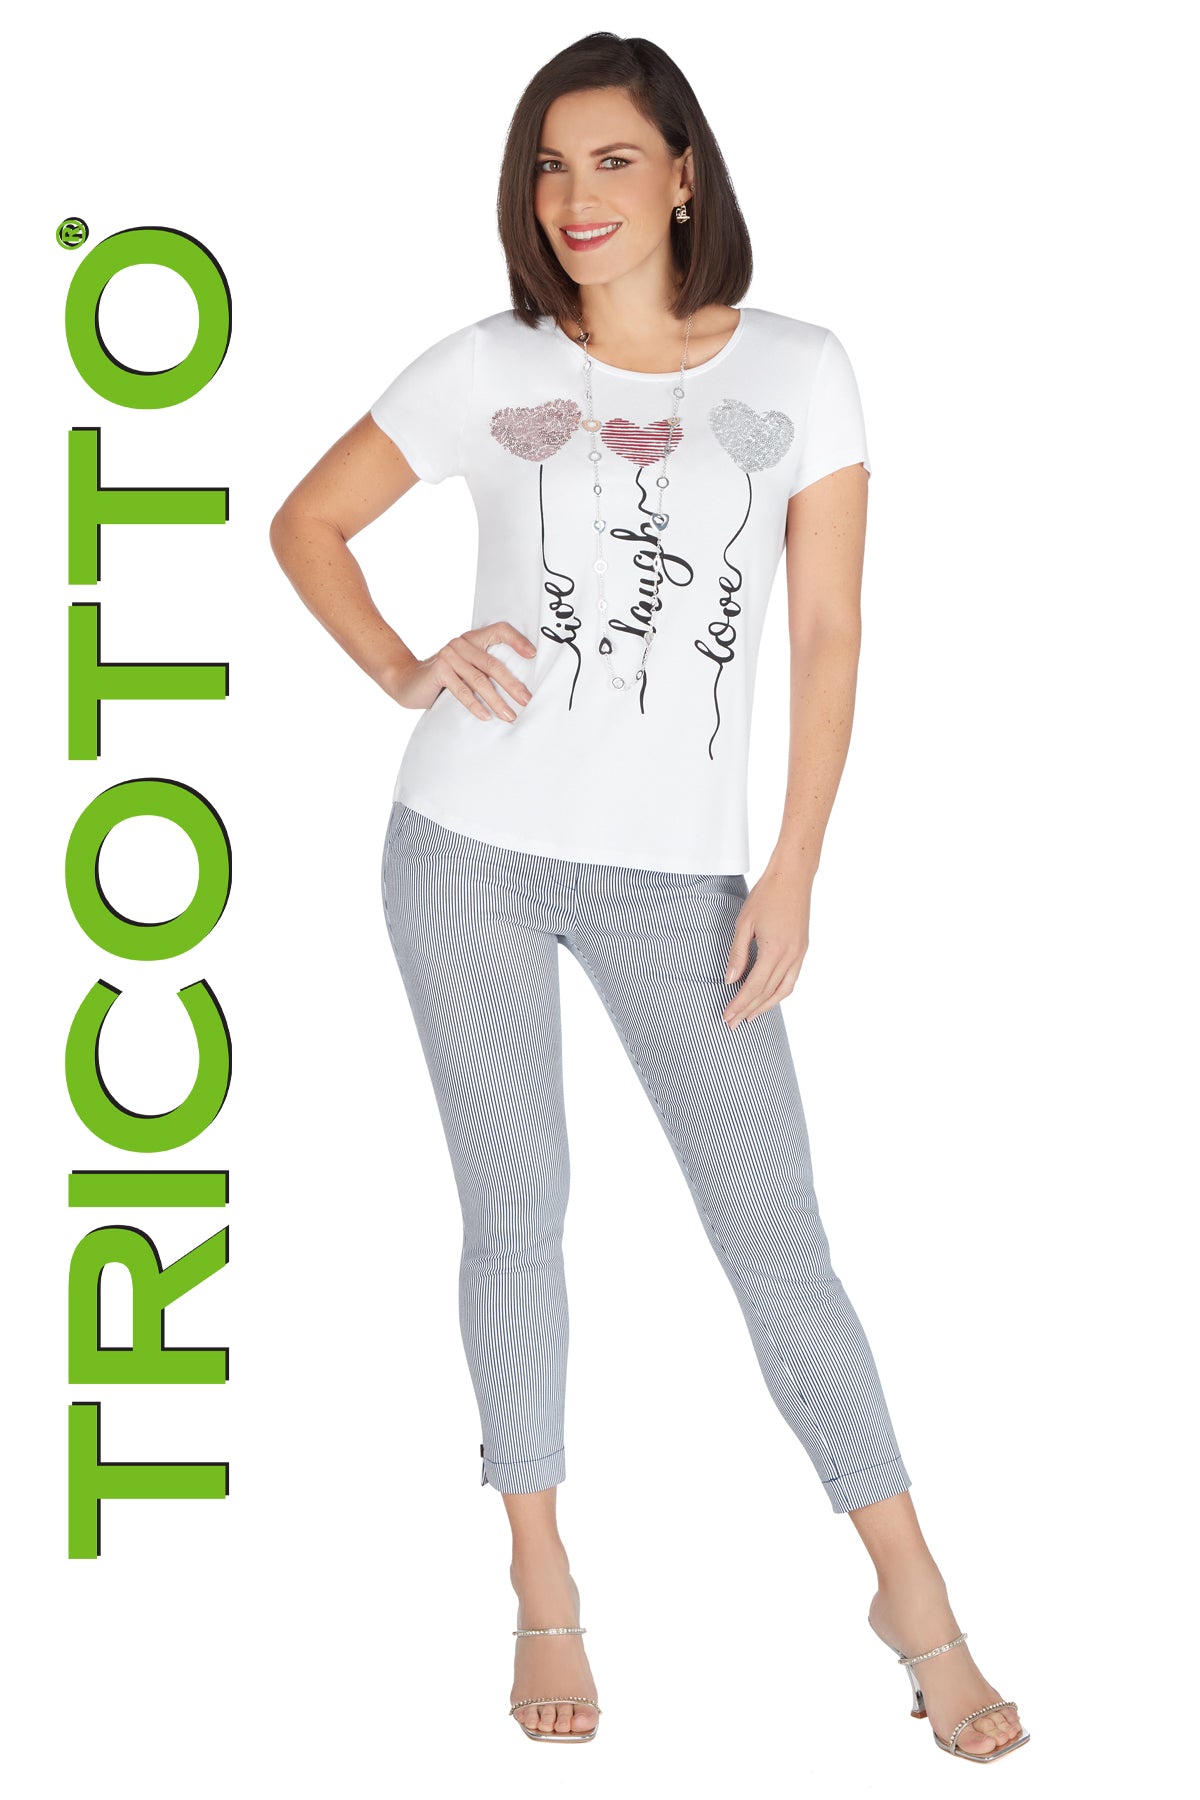 Tricotto T-shirts-Buy Tricotto T-shirts Online-Tricotto Online T-shirt Shop